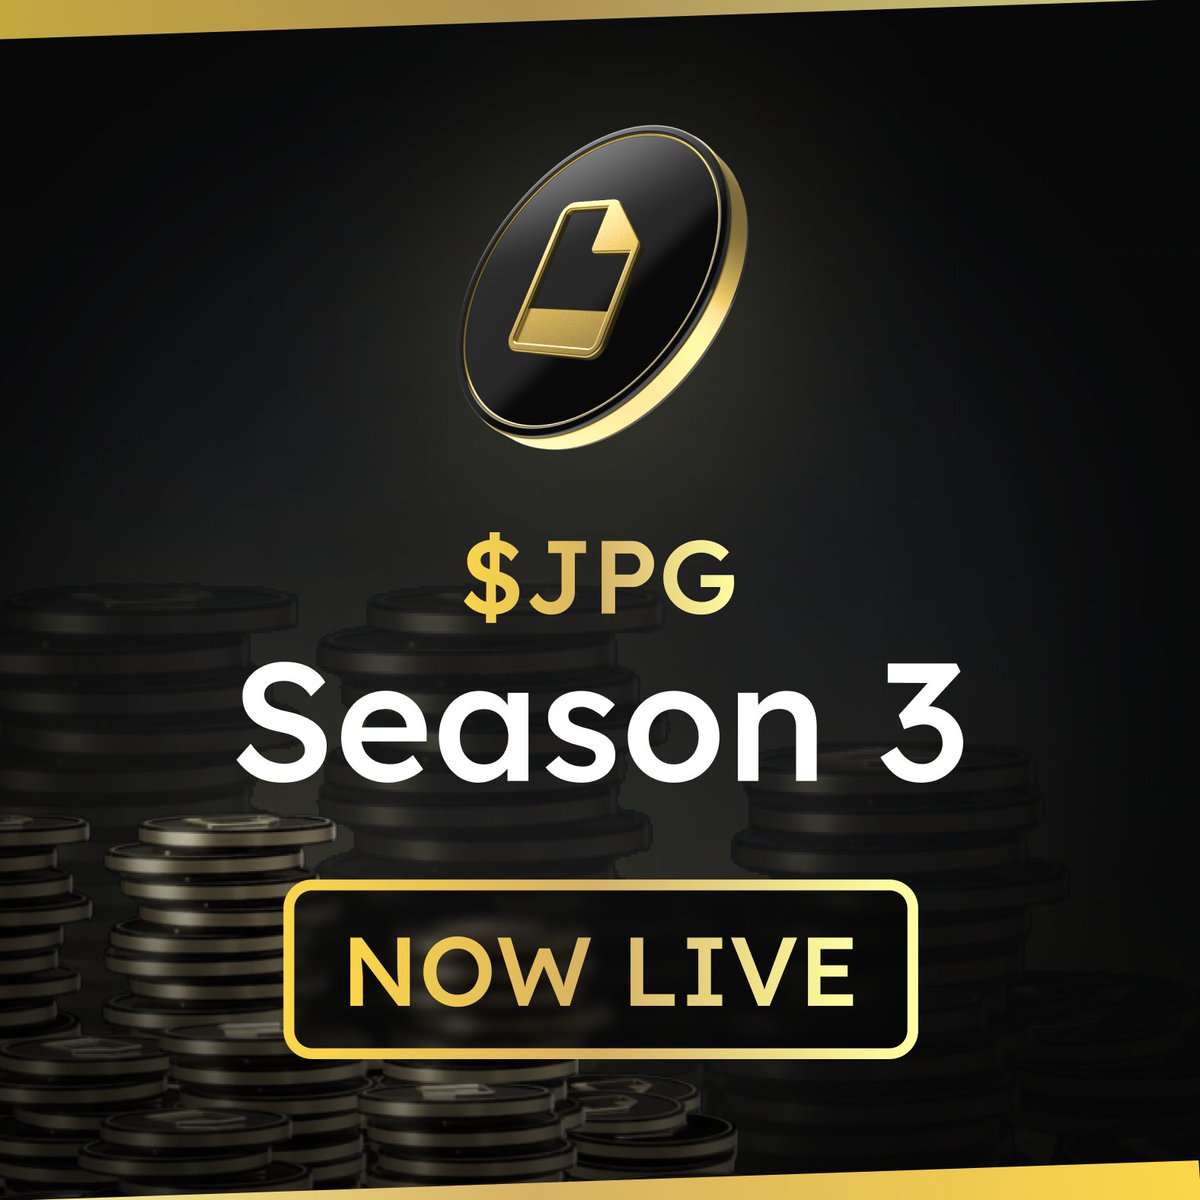 Attention: Season 3 is HERE 🚨 The seasonal leaderboard was reset, collection offer multipliers are now active and rebates are back ON! ✅ Last Season, the top 250 wallets got extra rewards. Climb the leaderboard and show you’re a Top Trader 📊